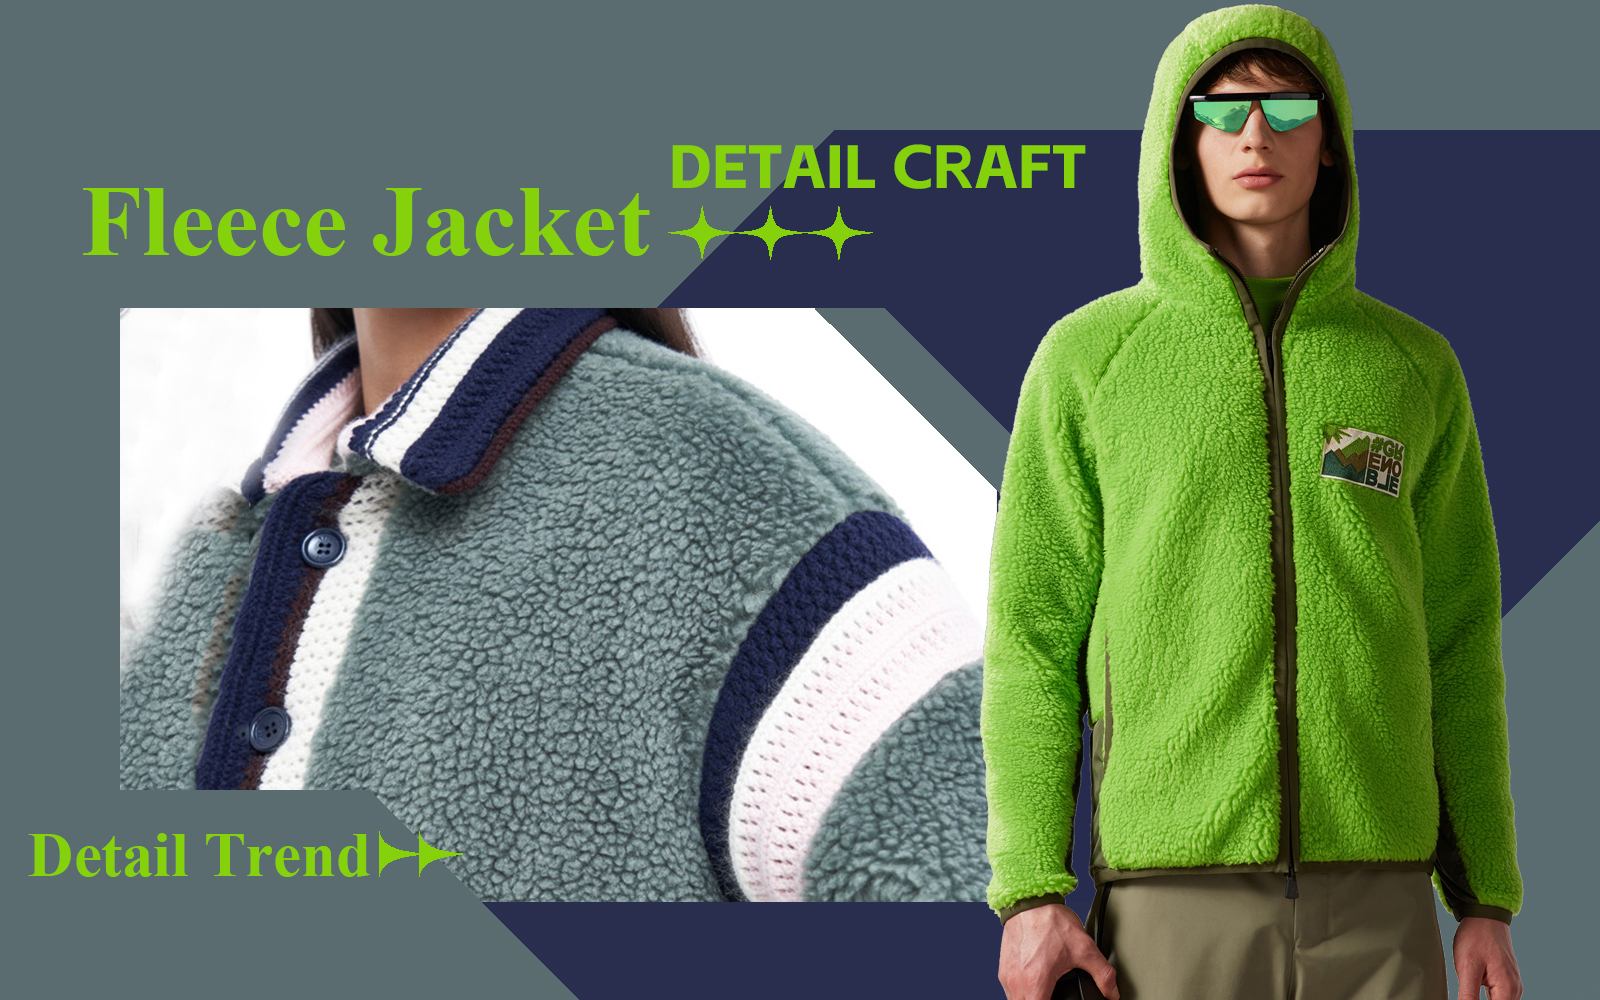 The Detail & Craft Trend for Fleece Jacket